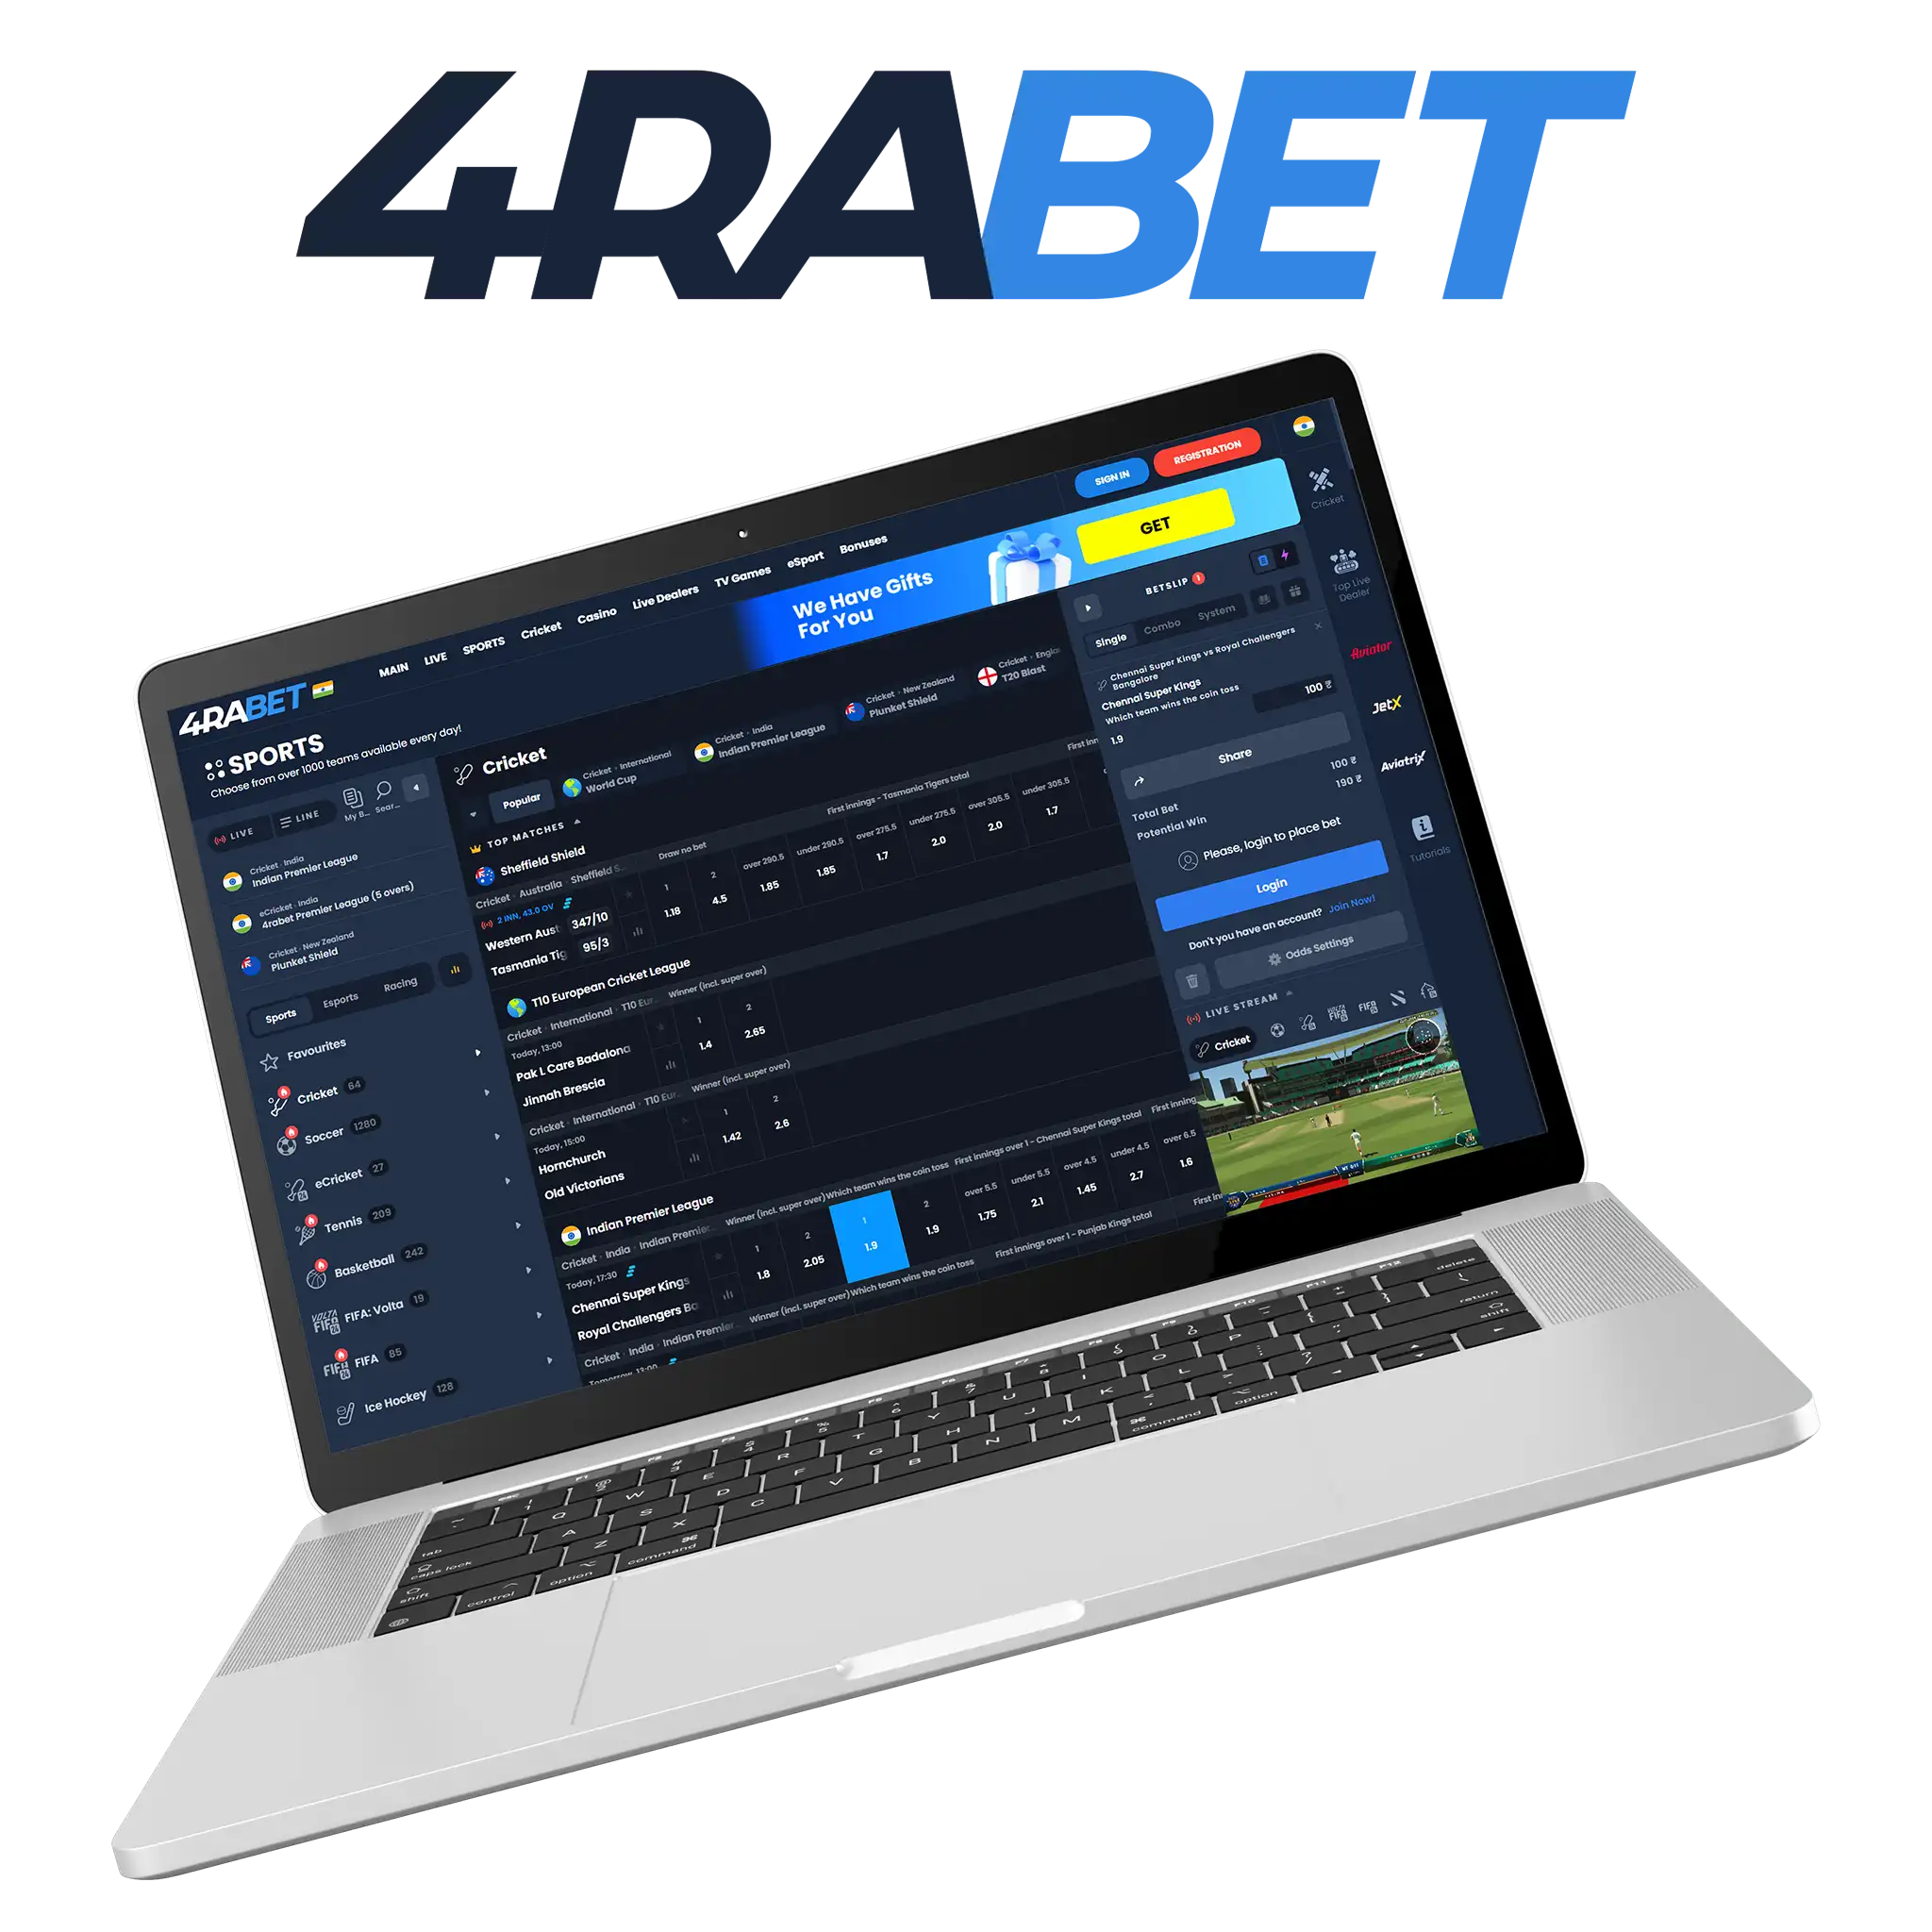 Thanks to 4rabet, you can rest assured your bets will bring both joy and impressive winnings.